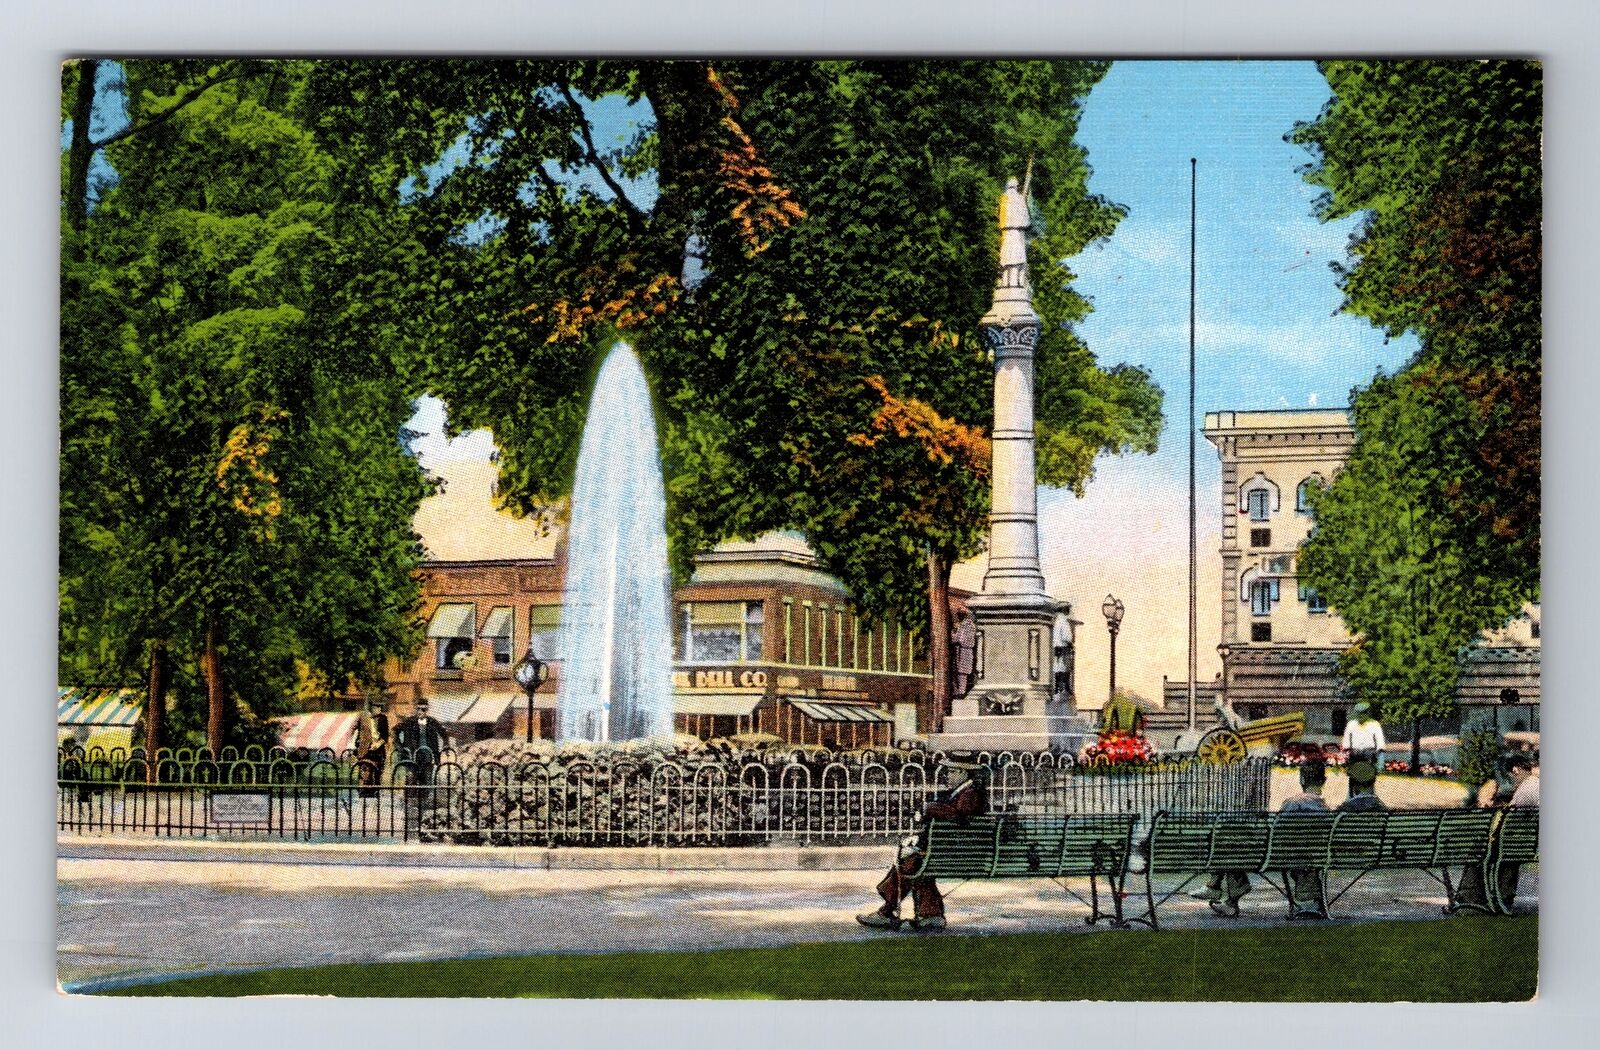 Elyria OH-Ohio, Electric Fountain in Ely Park, Antique Vintage Postcard